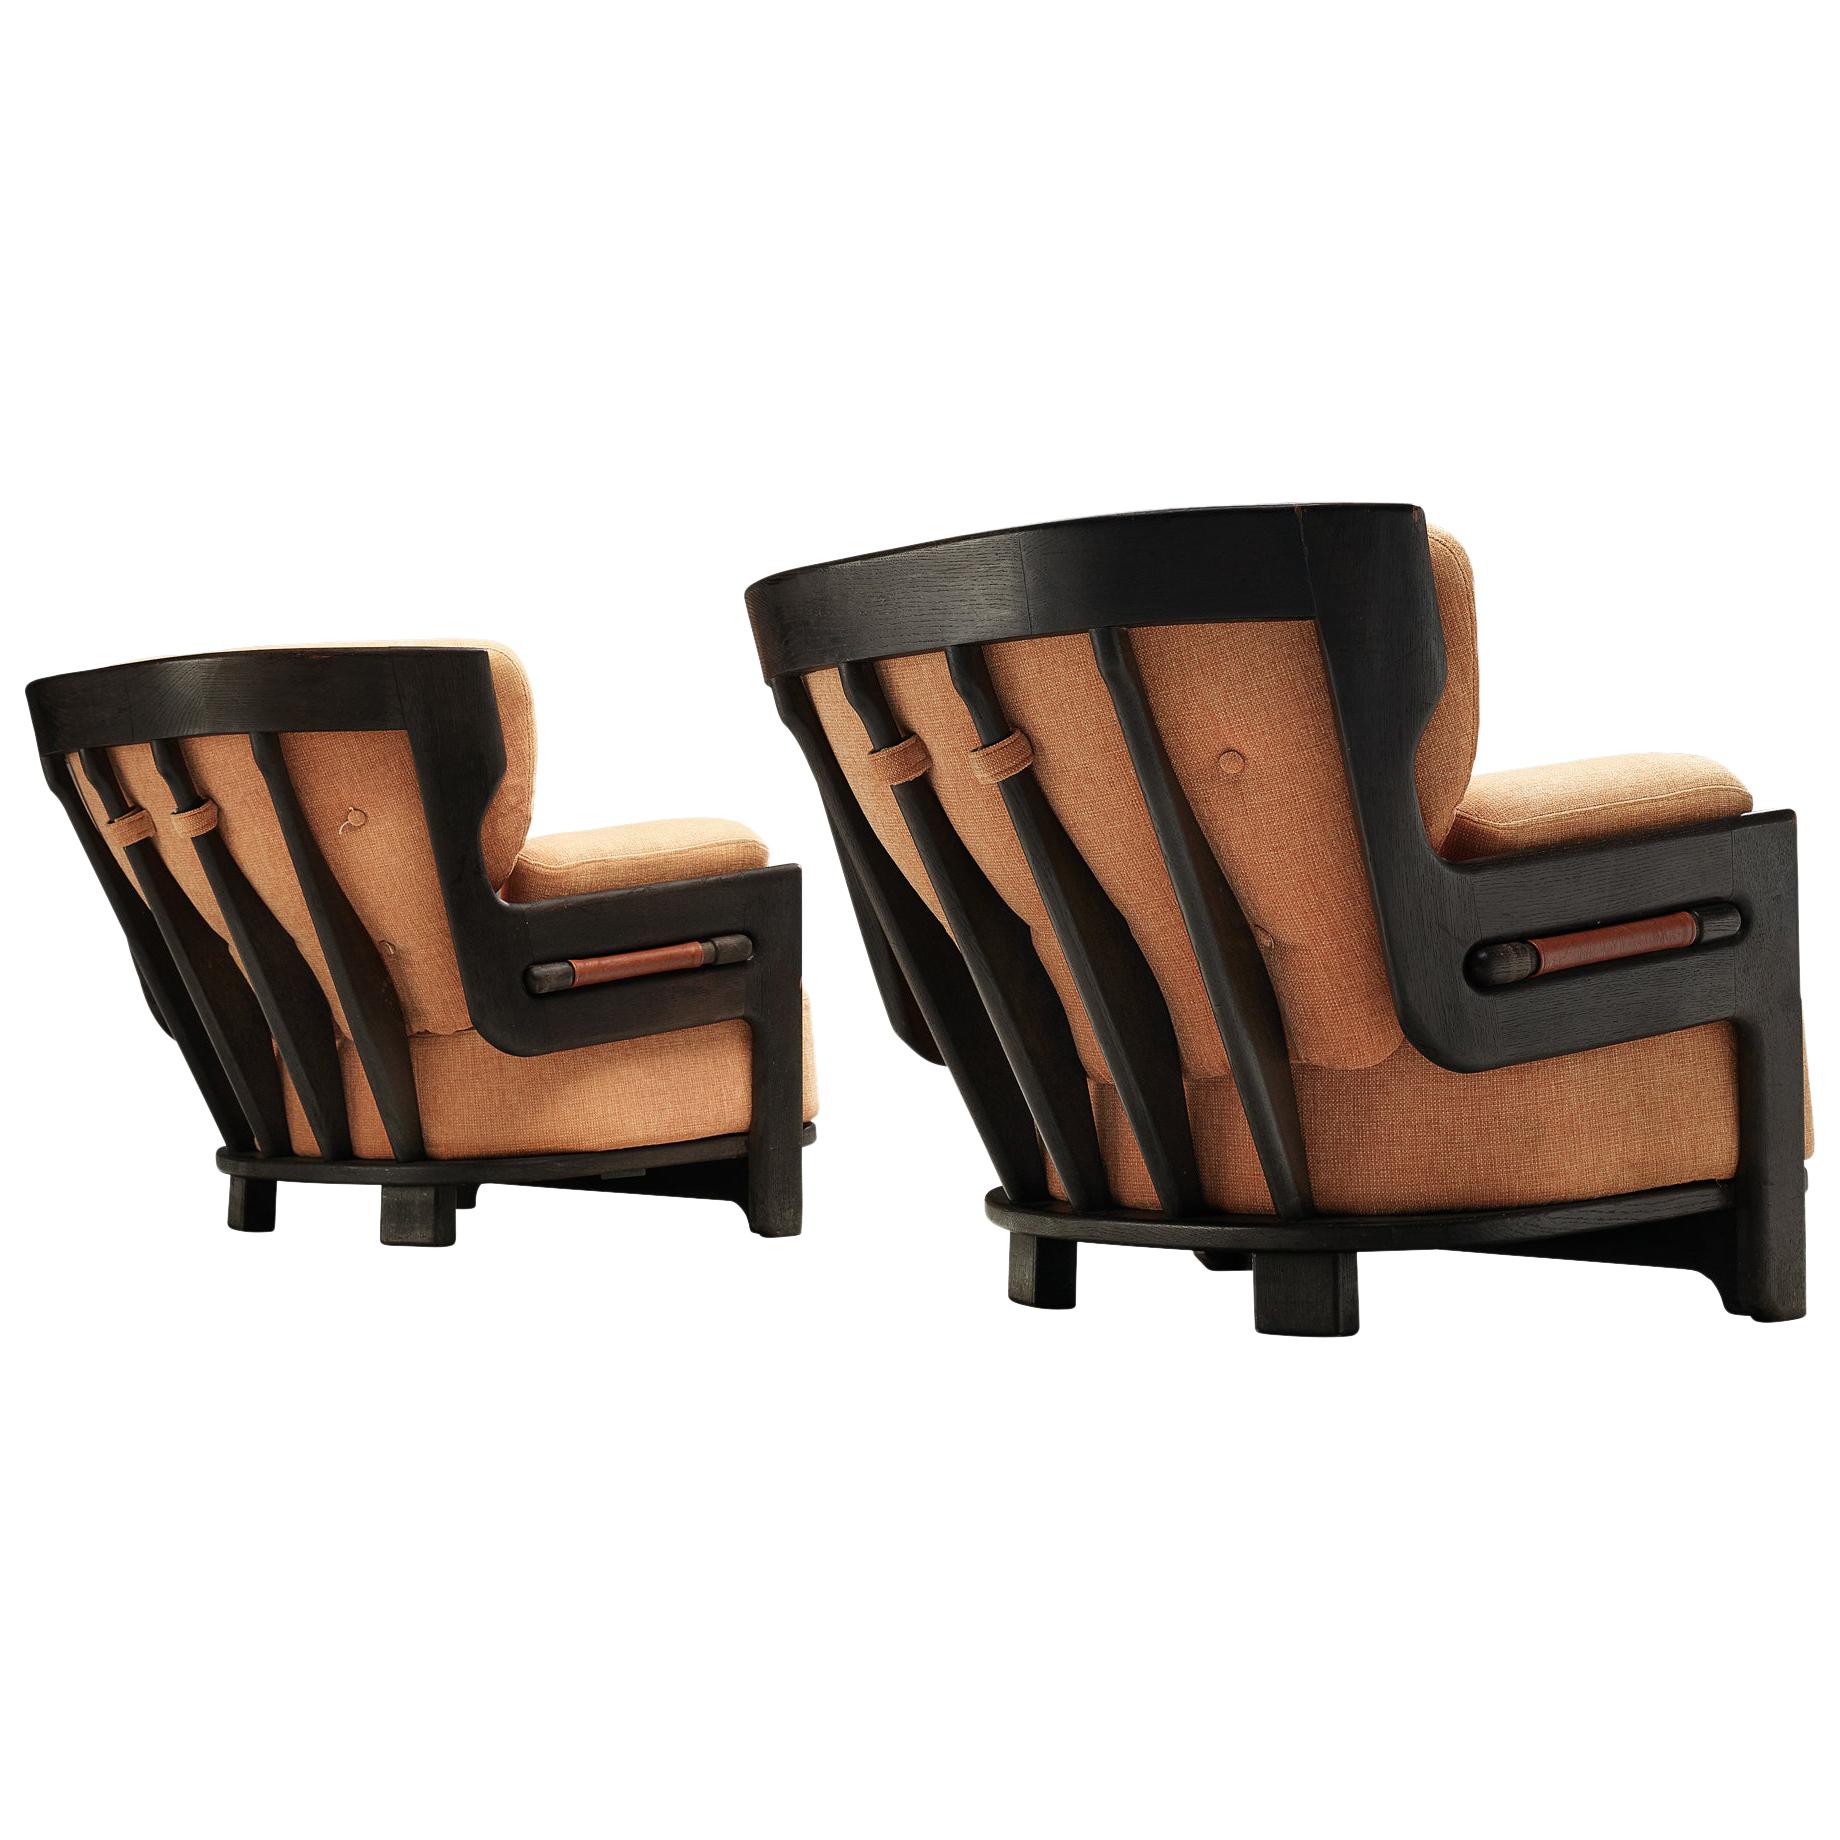 Guillerme et Chambron Pair of 'Denis' Lounge Chairs in Darkened Oak